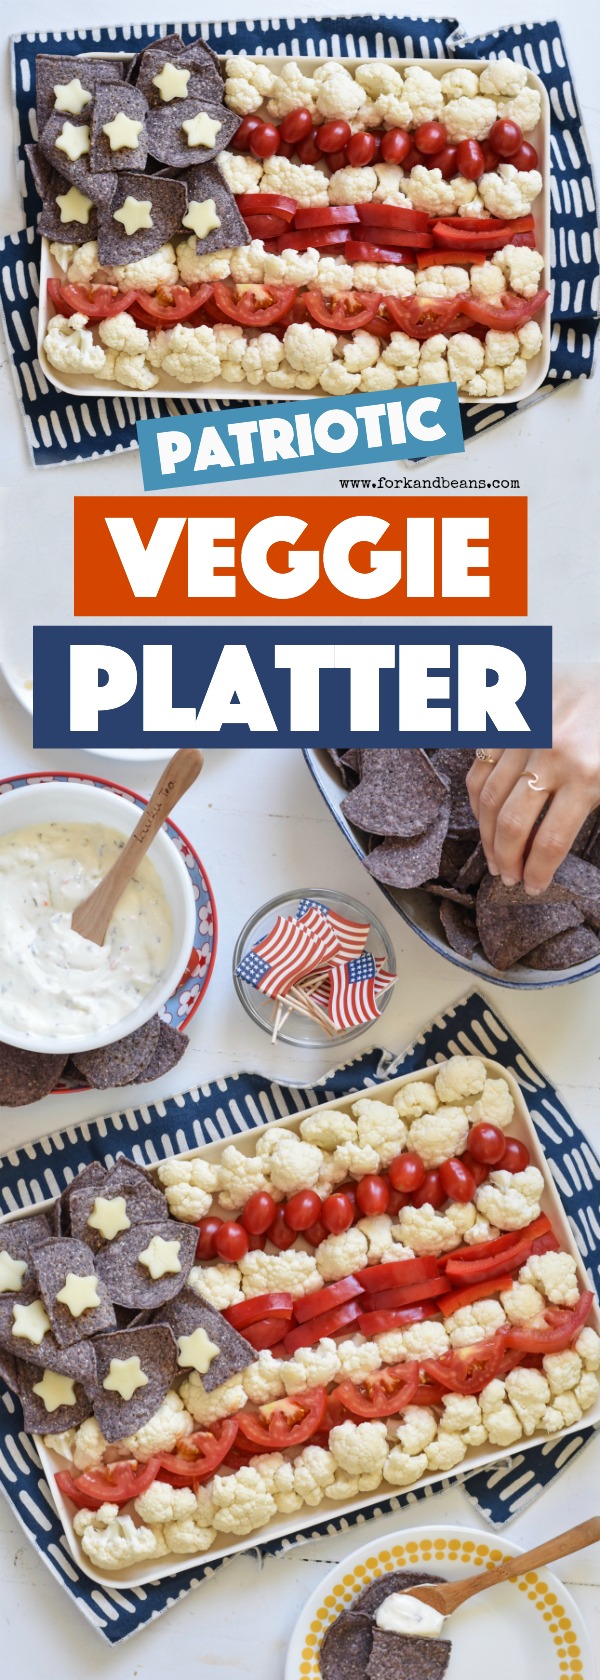 Celebrate the red, white, and blue with this veggie and tortilla chip-filled Patriotic Veggie Platter. It's a fun way to say Happy Independence Day!